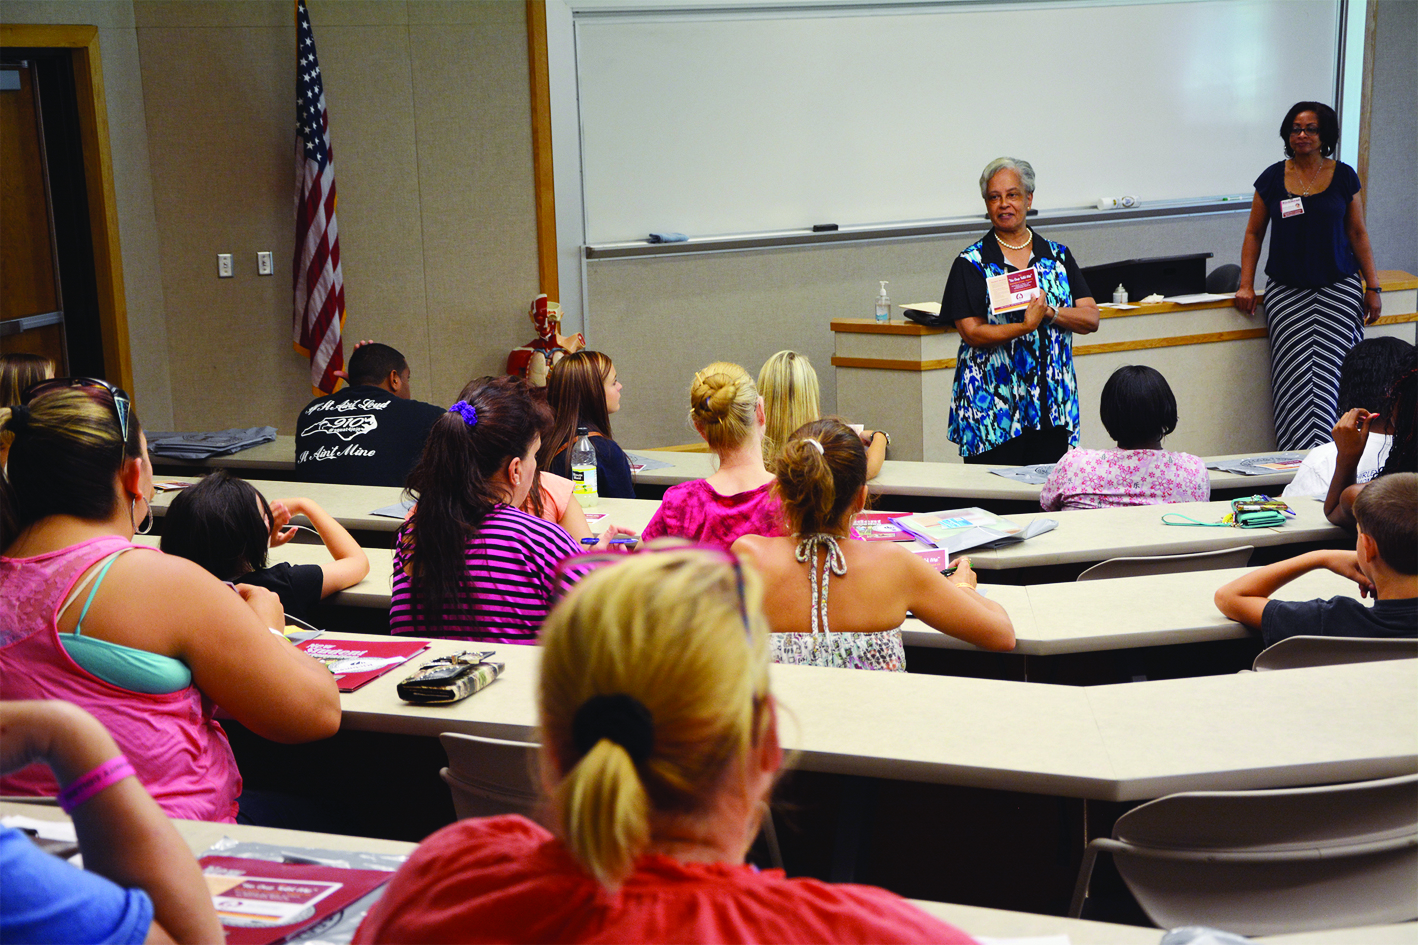 Student Services staff members speak to students during an orientation session at Richmond Community College.